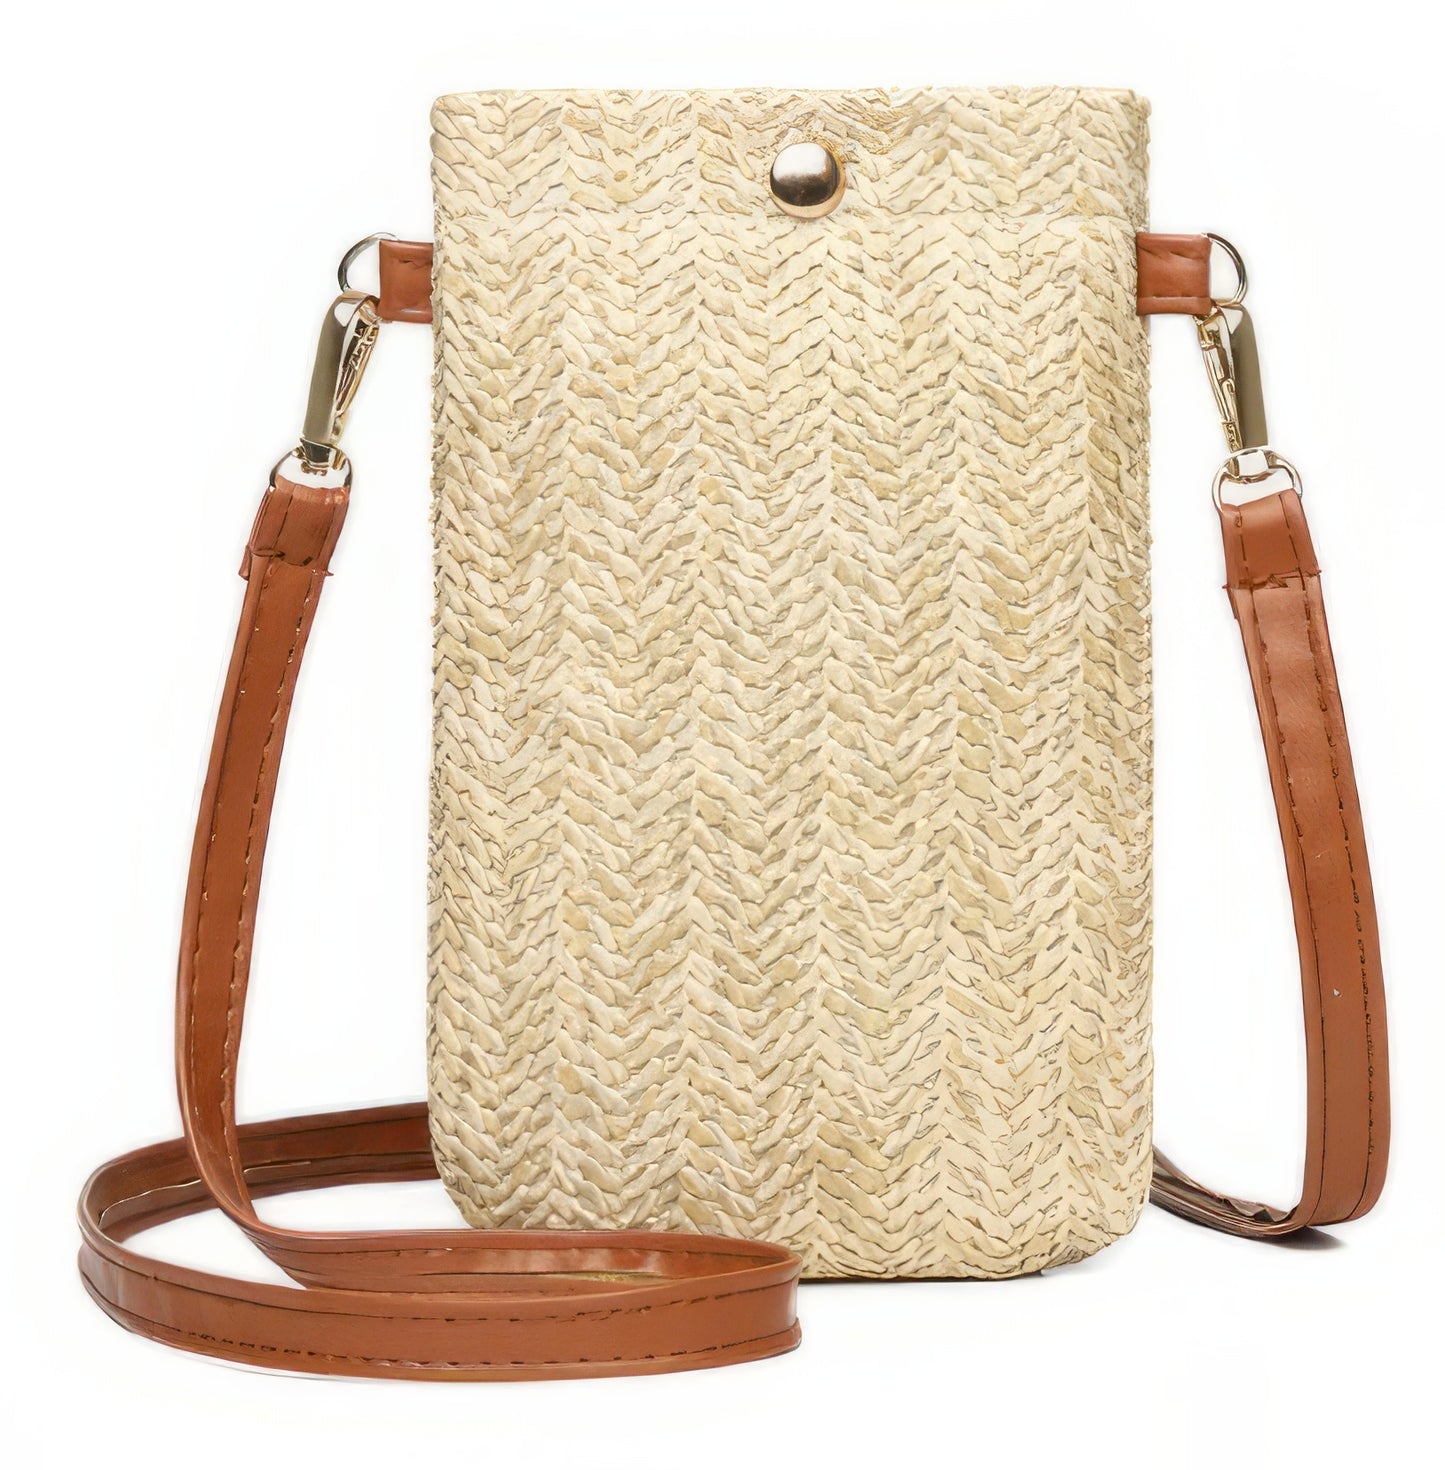 Woven Rattan Crossbody with Leather Strap in Brown Sugar